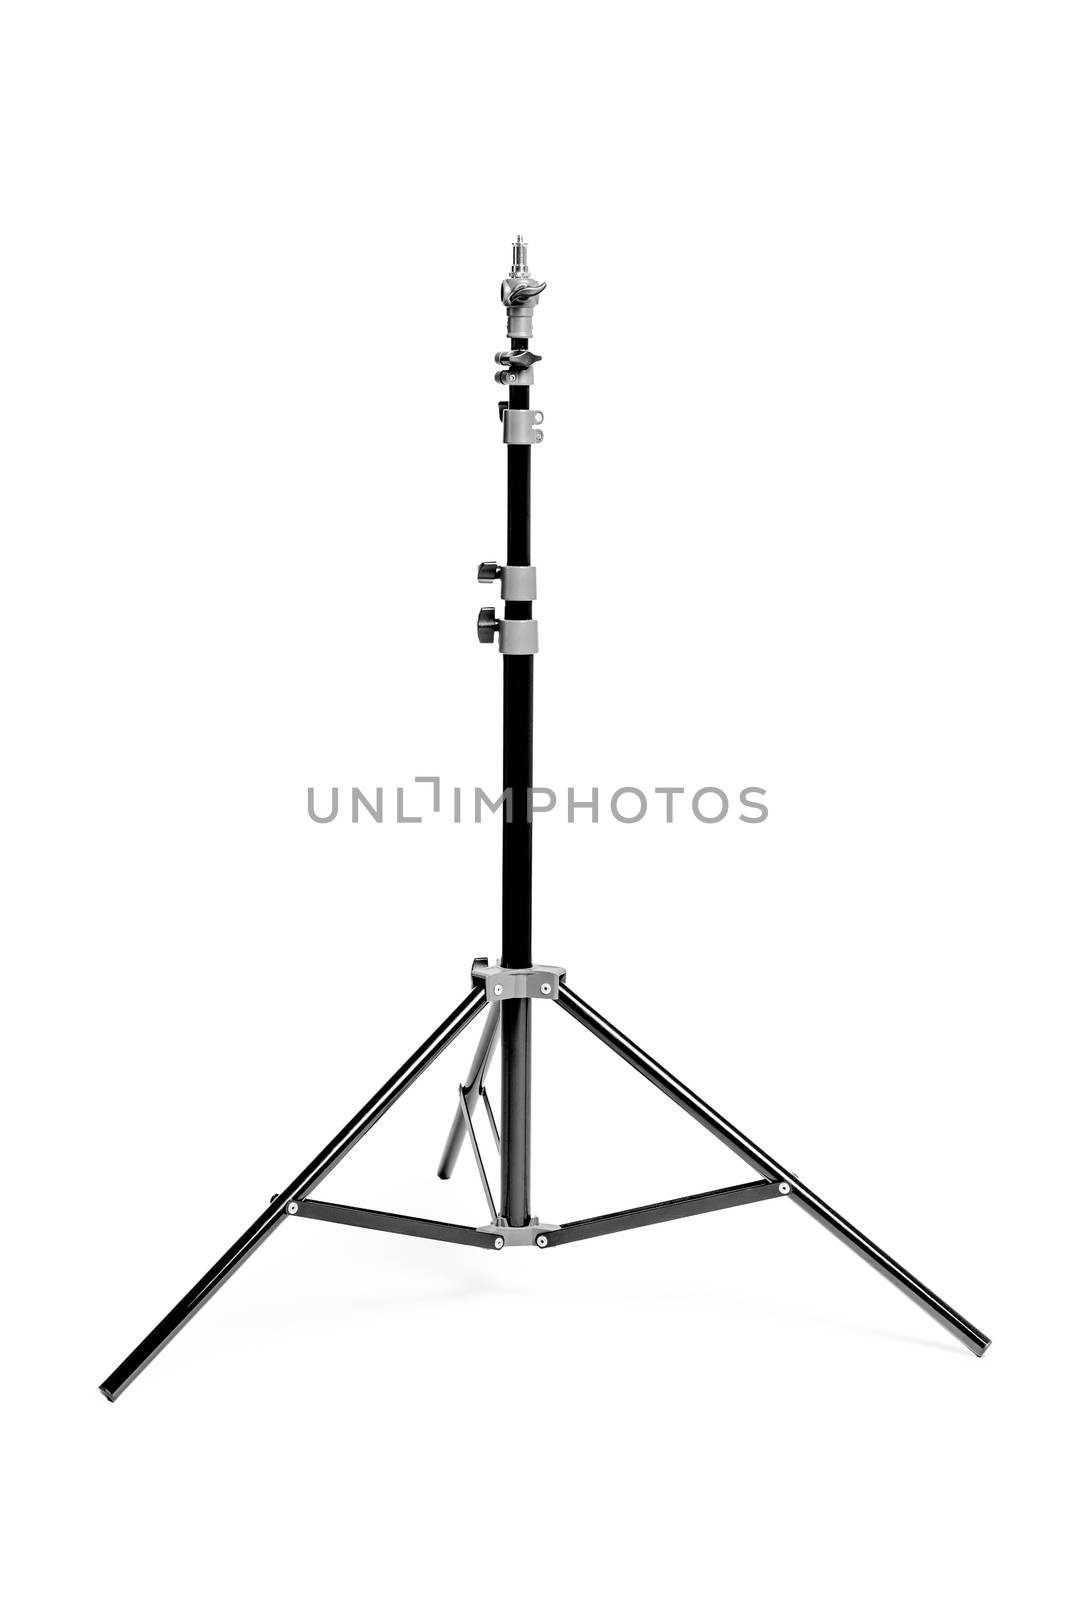 rack for photo studio equipment on a white background close-up by kosmsos111